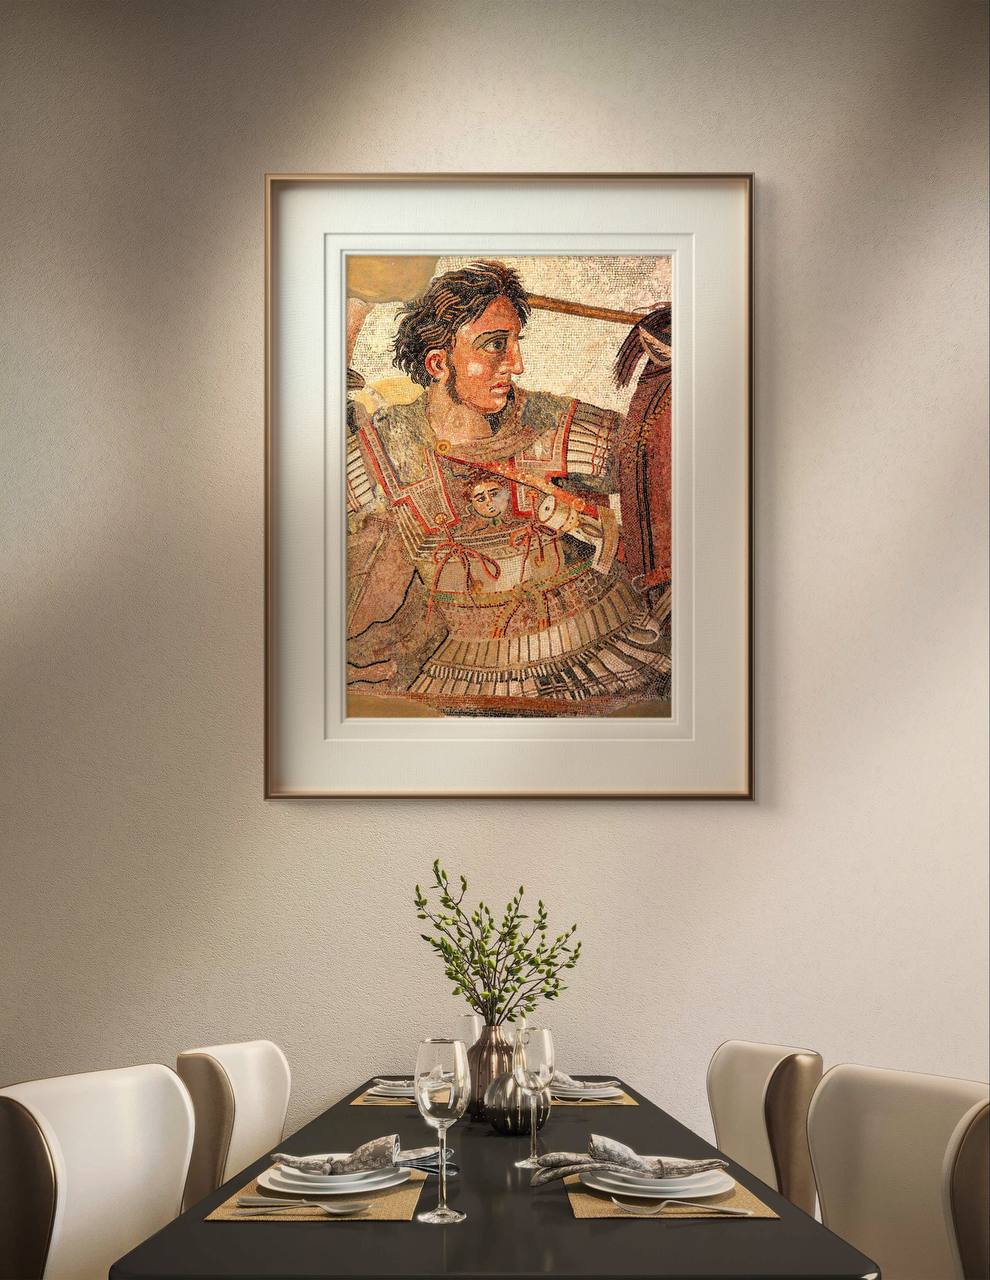 The poster feature a beautifully framed reproduction of the ancient mosaic known as the Battle of Issus, which depicts Alexander the Great in vivid detail. The artwork showcases Alexander in battle. is hung in a dining room, positioned above a set dining table. The table is elegantly set with wine glasses, plates, and cutlery, creating an inviting atmosphere for a meal. The warm lighting enhances the colors of the mosaic, making it a focal point of the room.